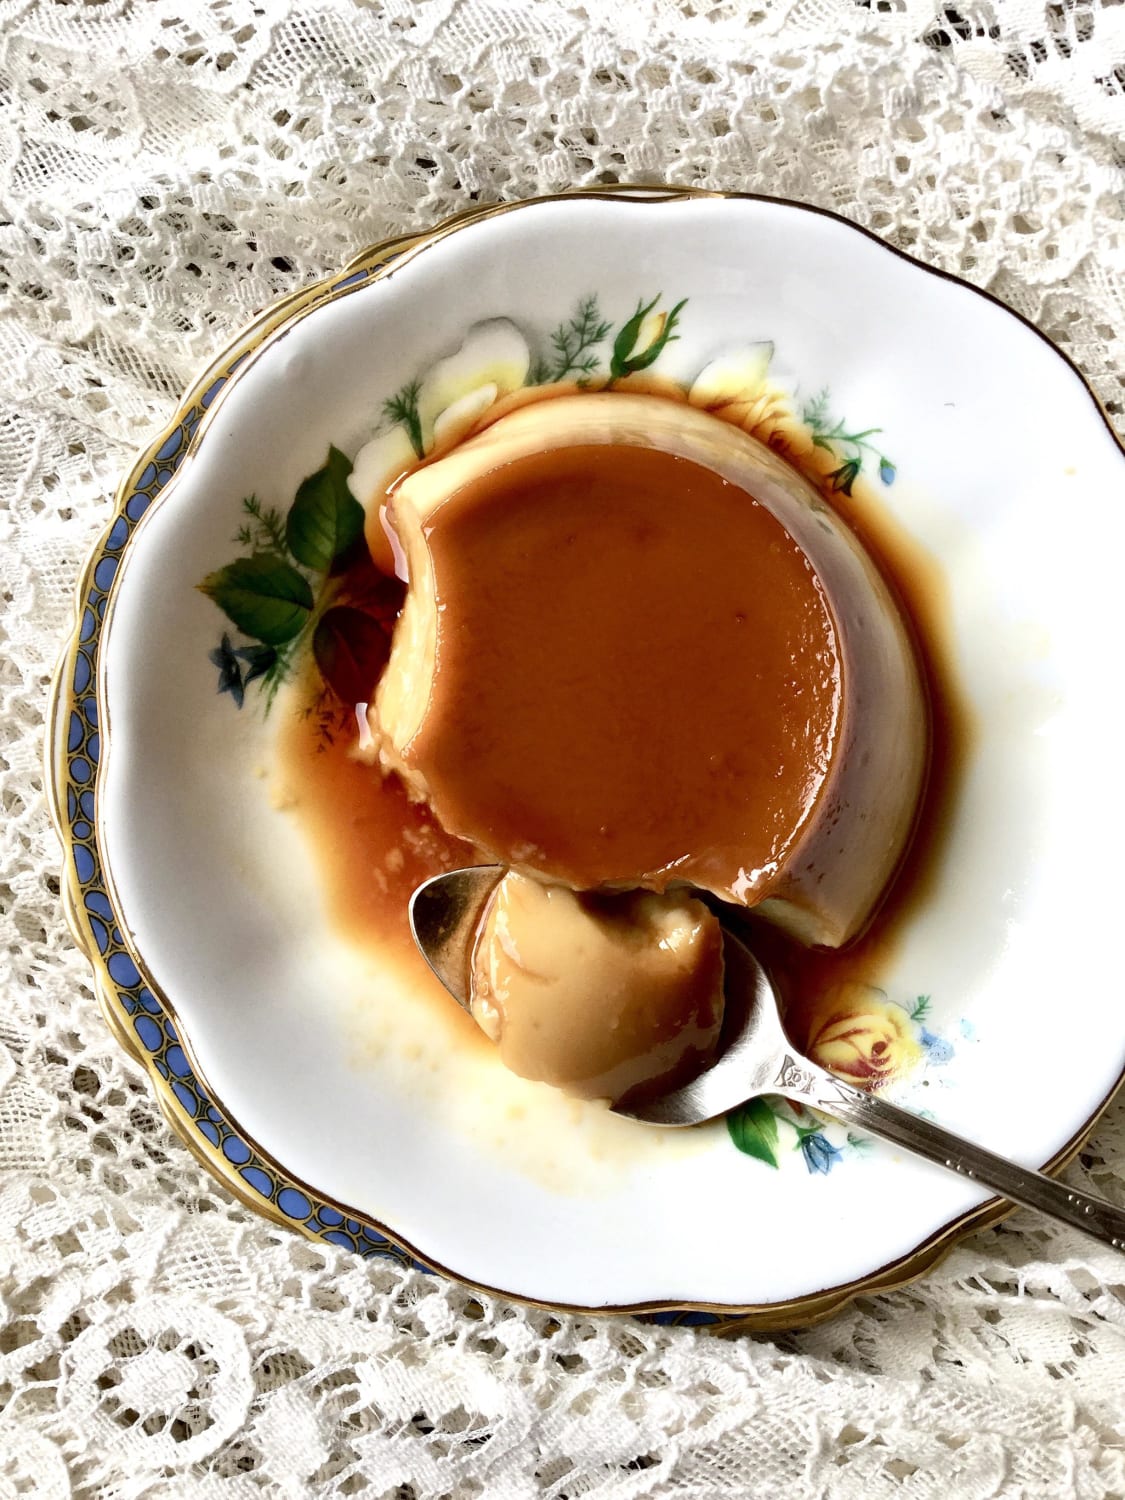 Crème caramel without the weird eggy flavour